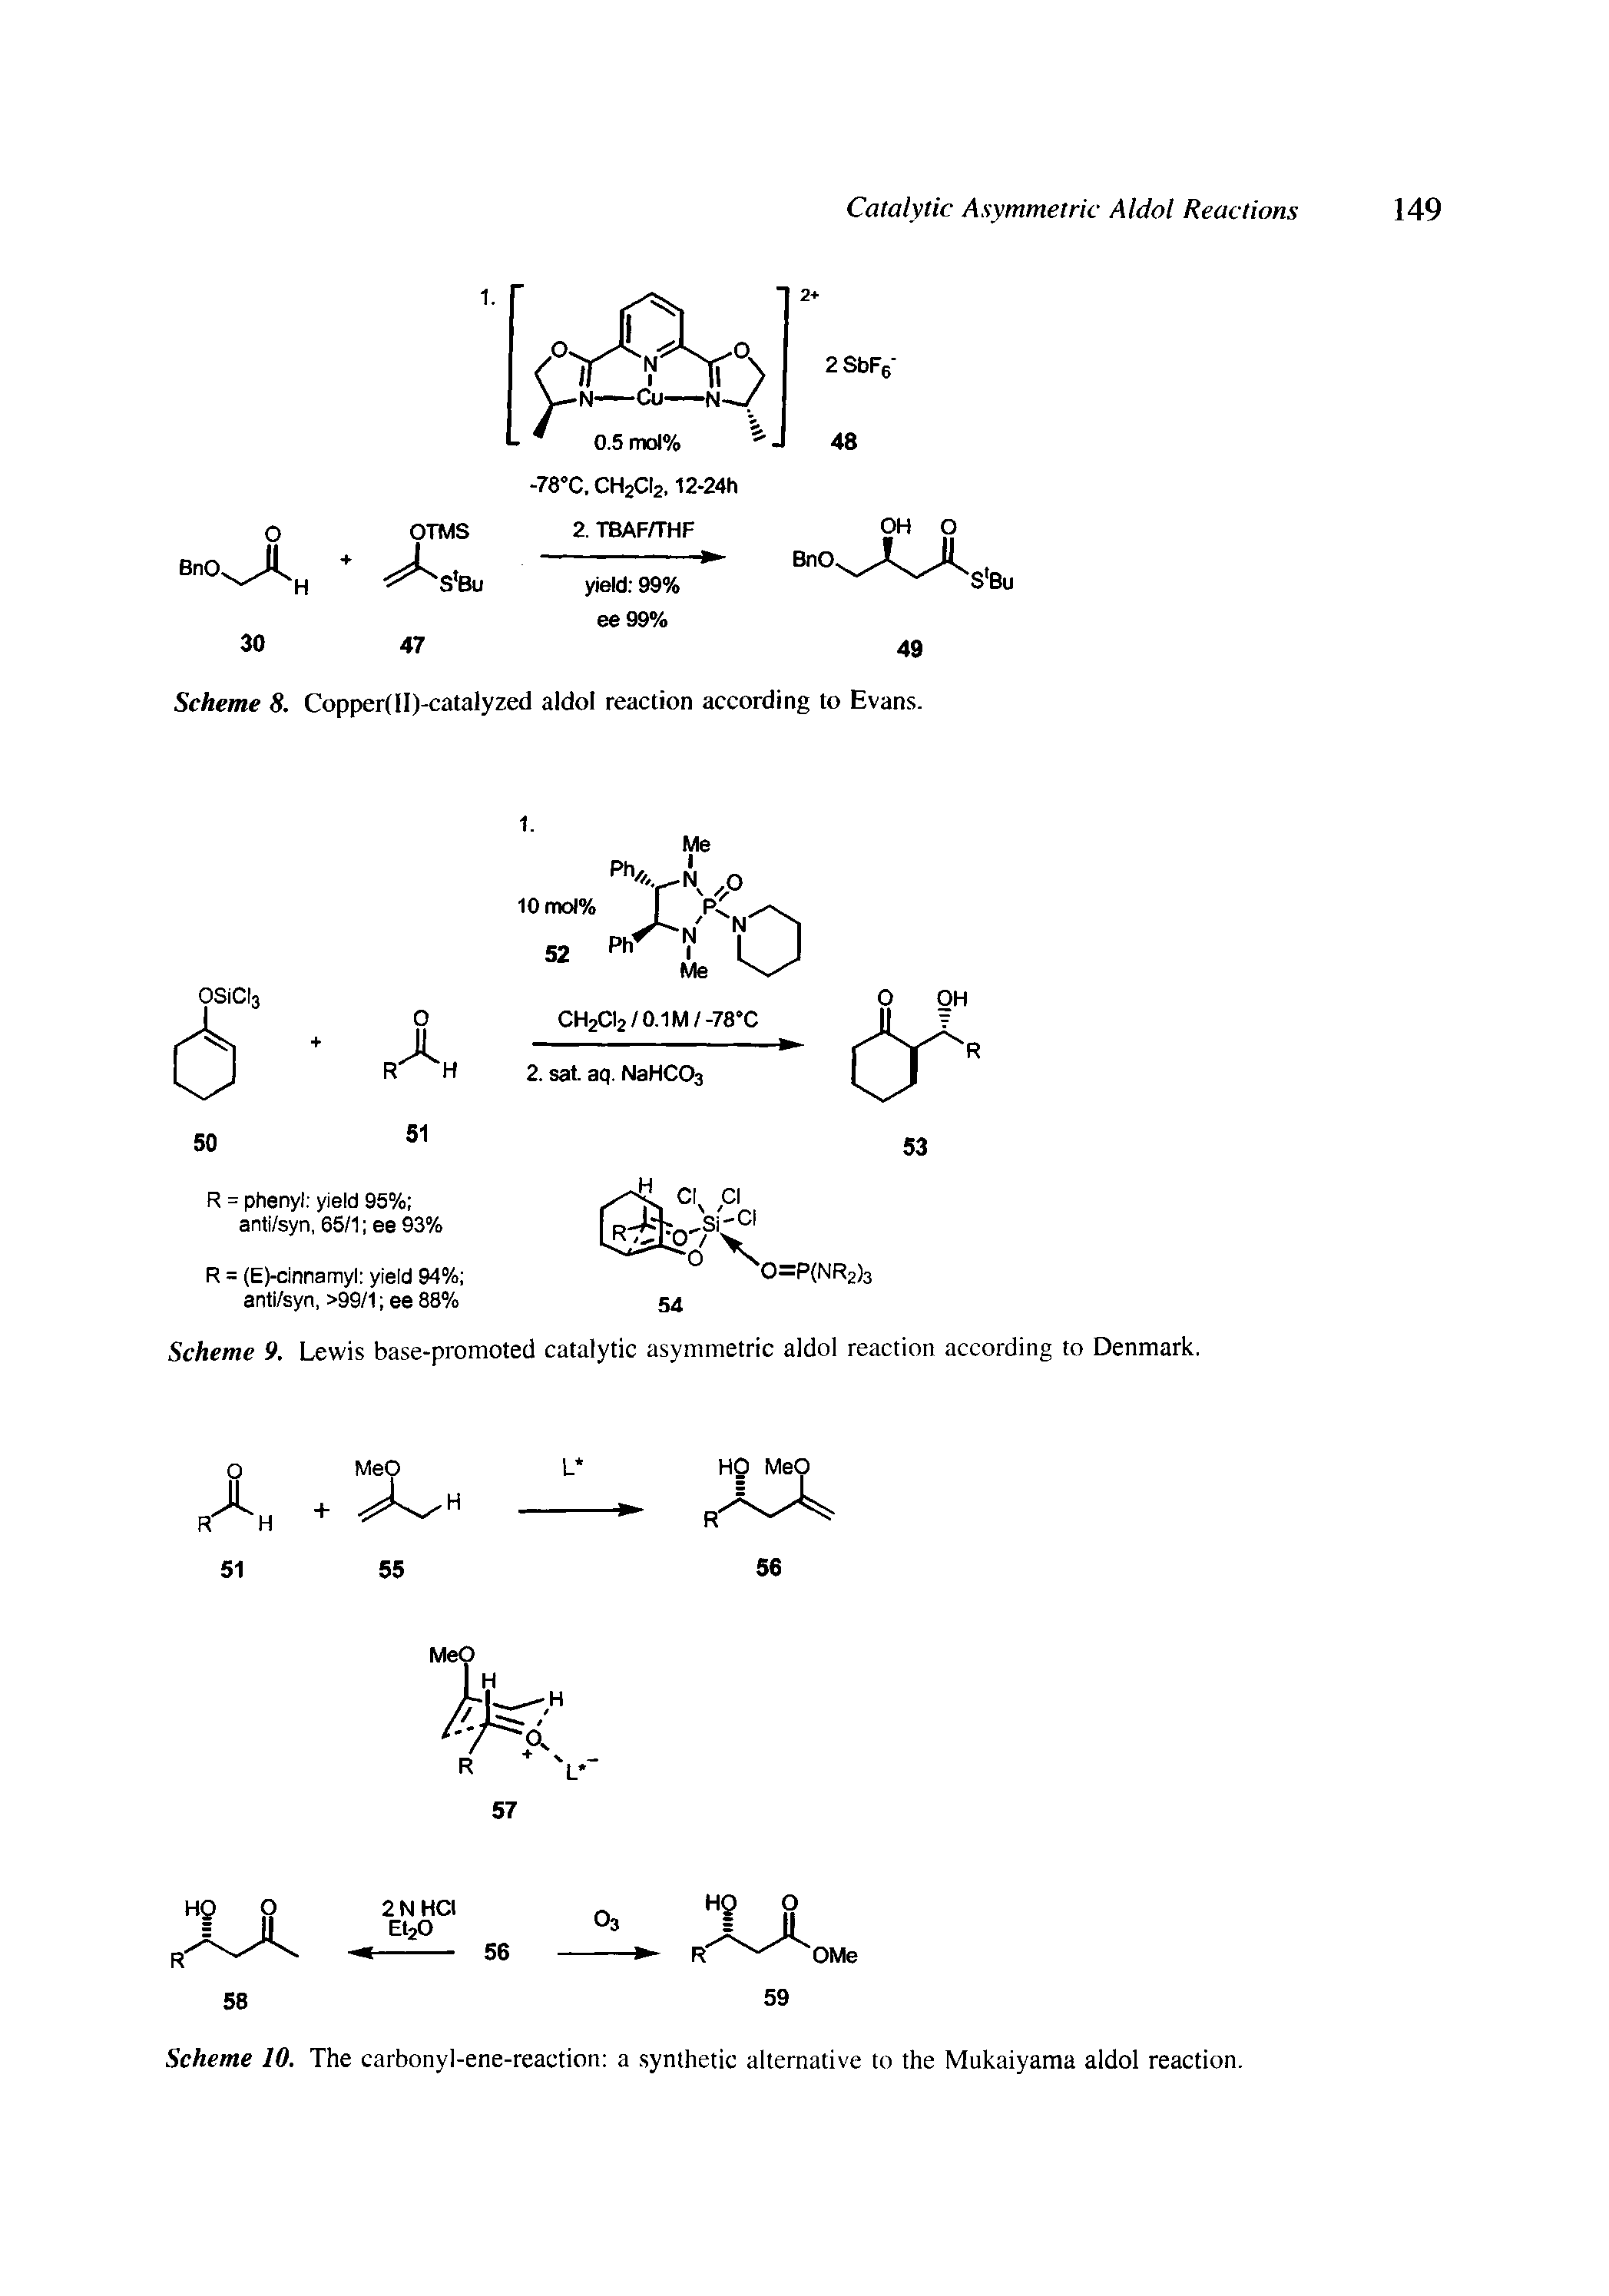 Scheme 10. The carbonyl-ene-reaction a synthetic alternative to the Mukaiyama aldol reaction.